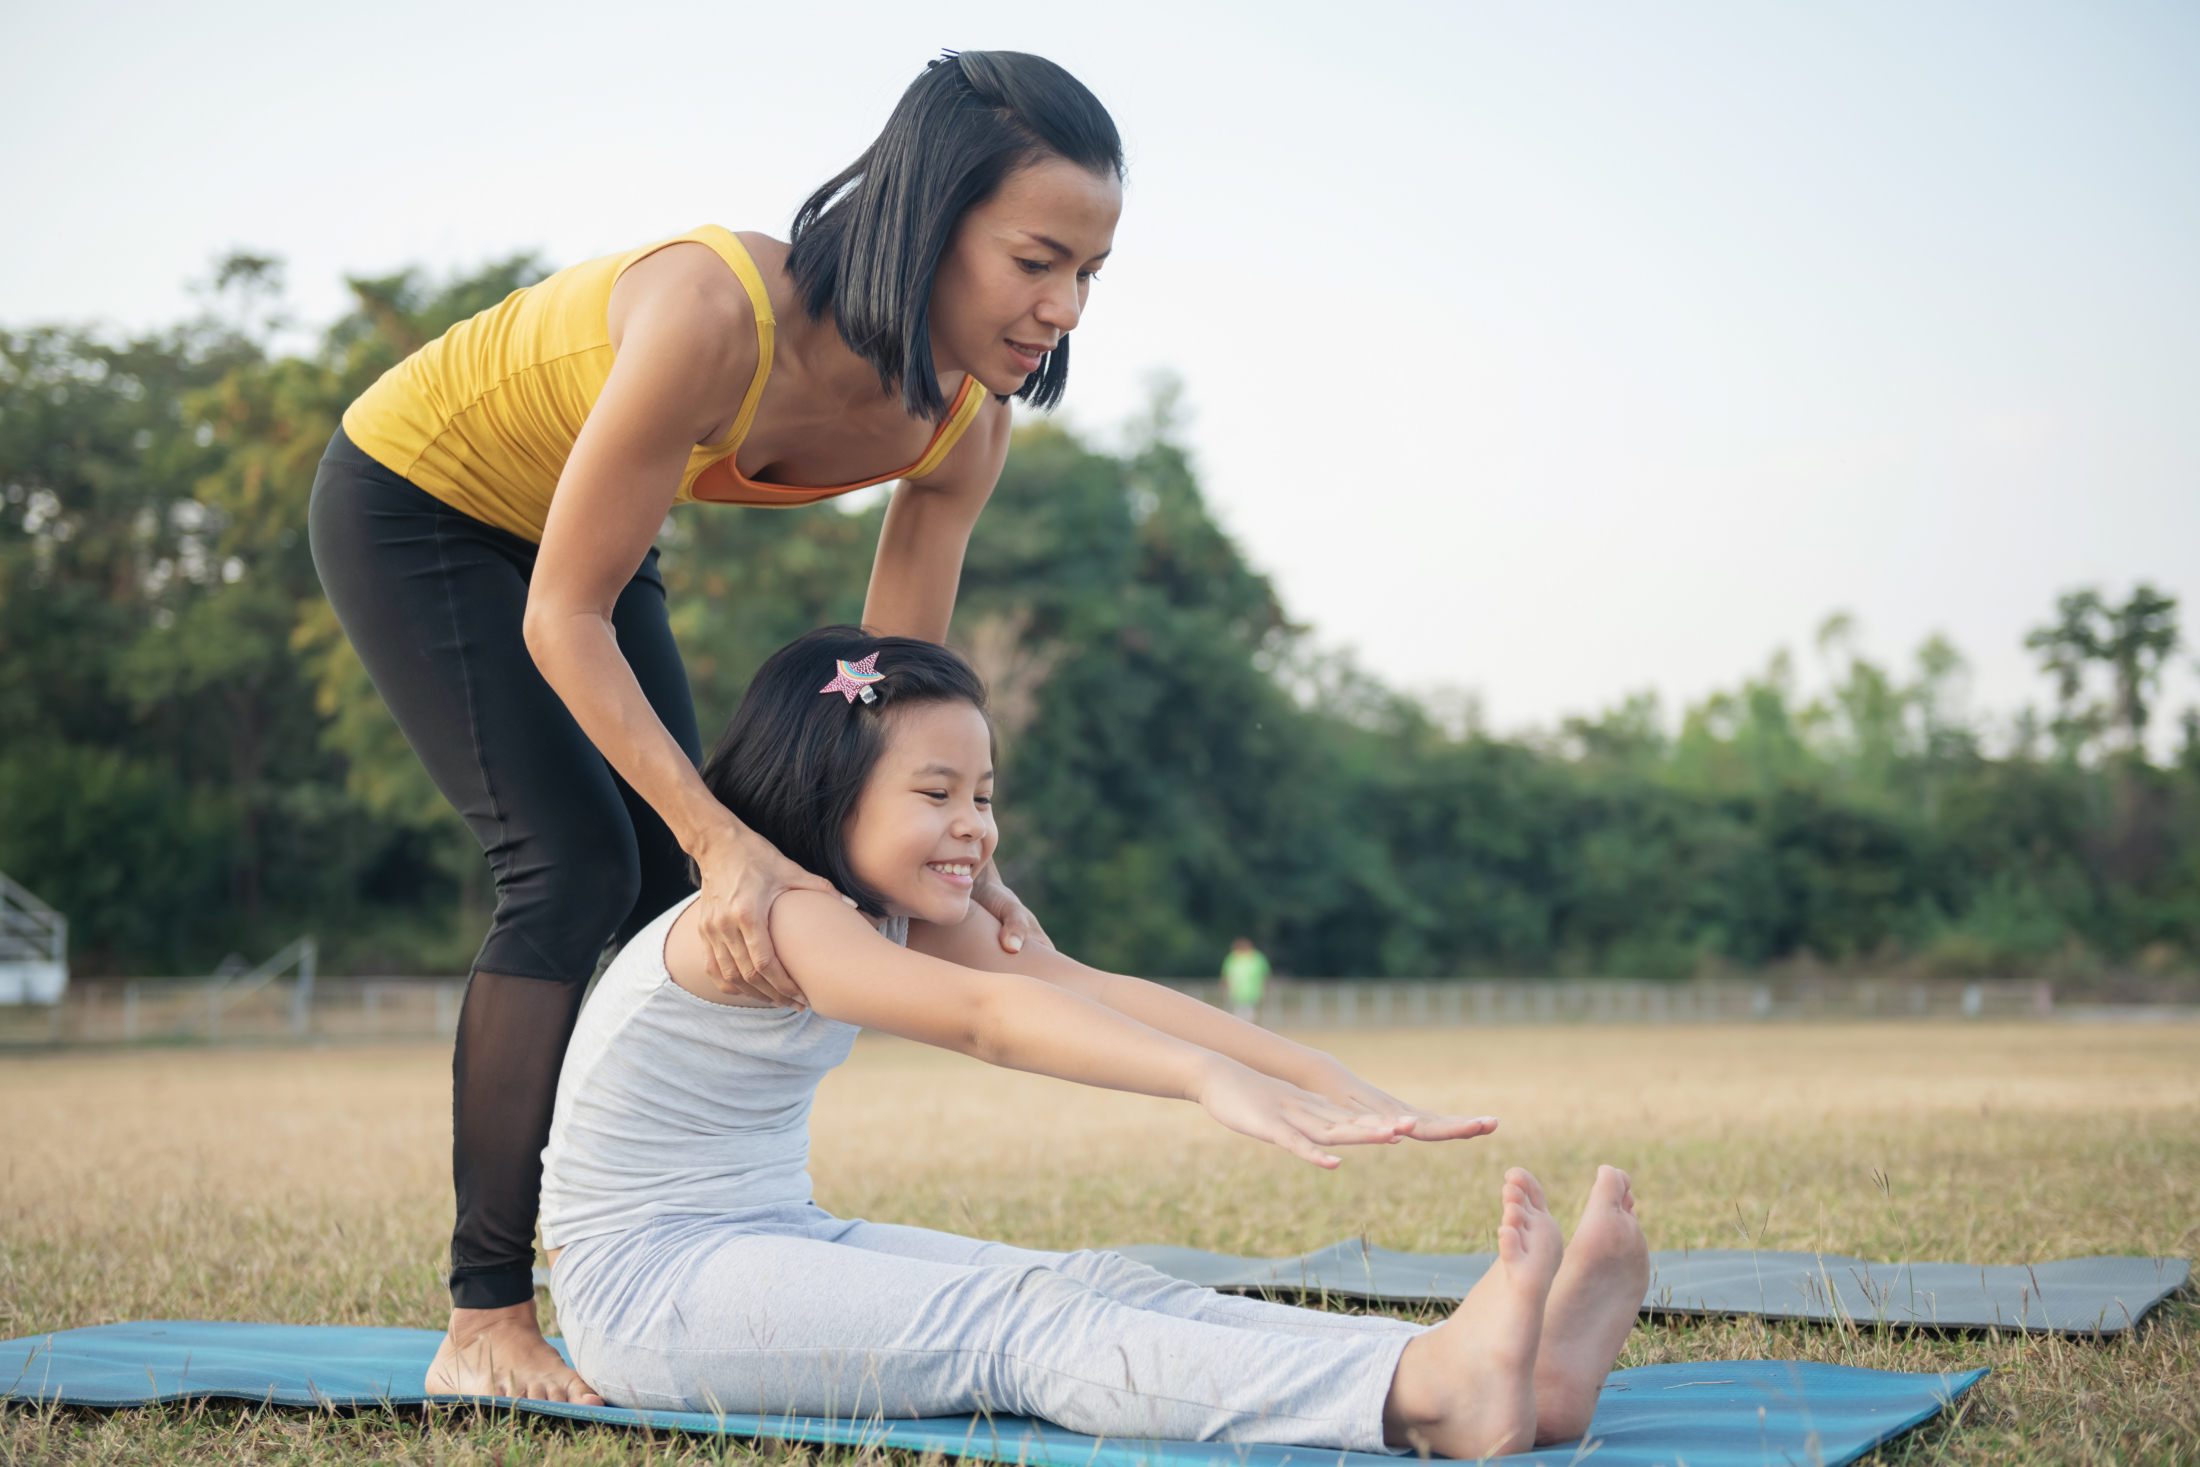 mother-and-daughter-doing-yoga-woman-and-child-training-in-the-park-outdoor-sports-healthy-sport-lifestyle-sitting-in-paschimottanasana-exercise-seated-forward-bend-pose.jpg